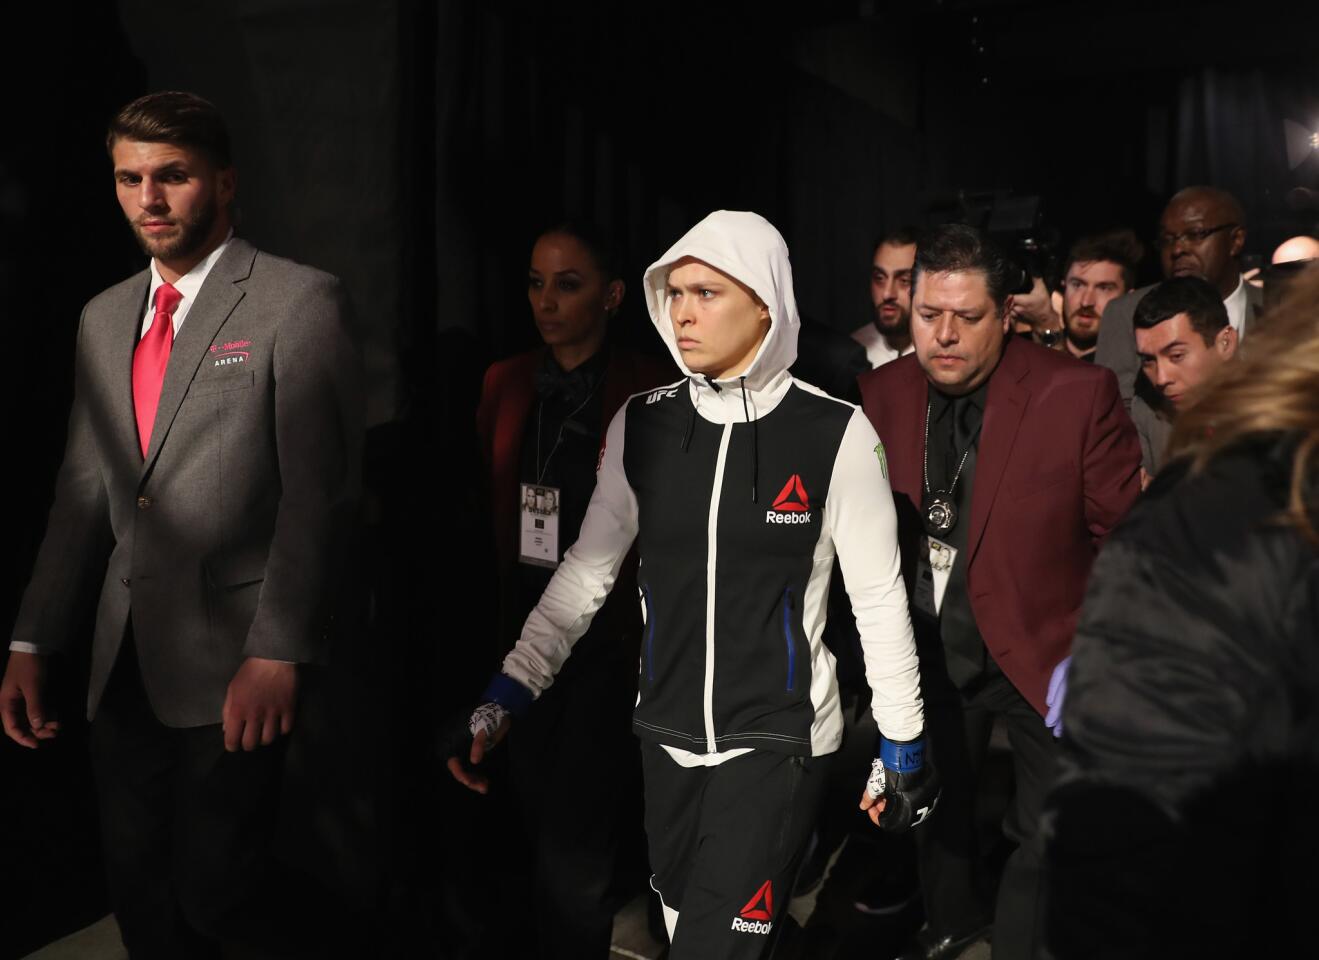 Ronda Rousey walks to the octagon to face Amanda Nunes for the women's bantamweight championship bout at UFC 207.